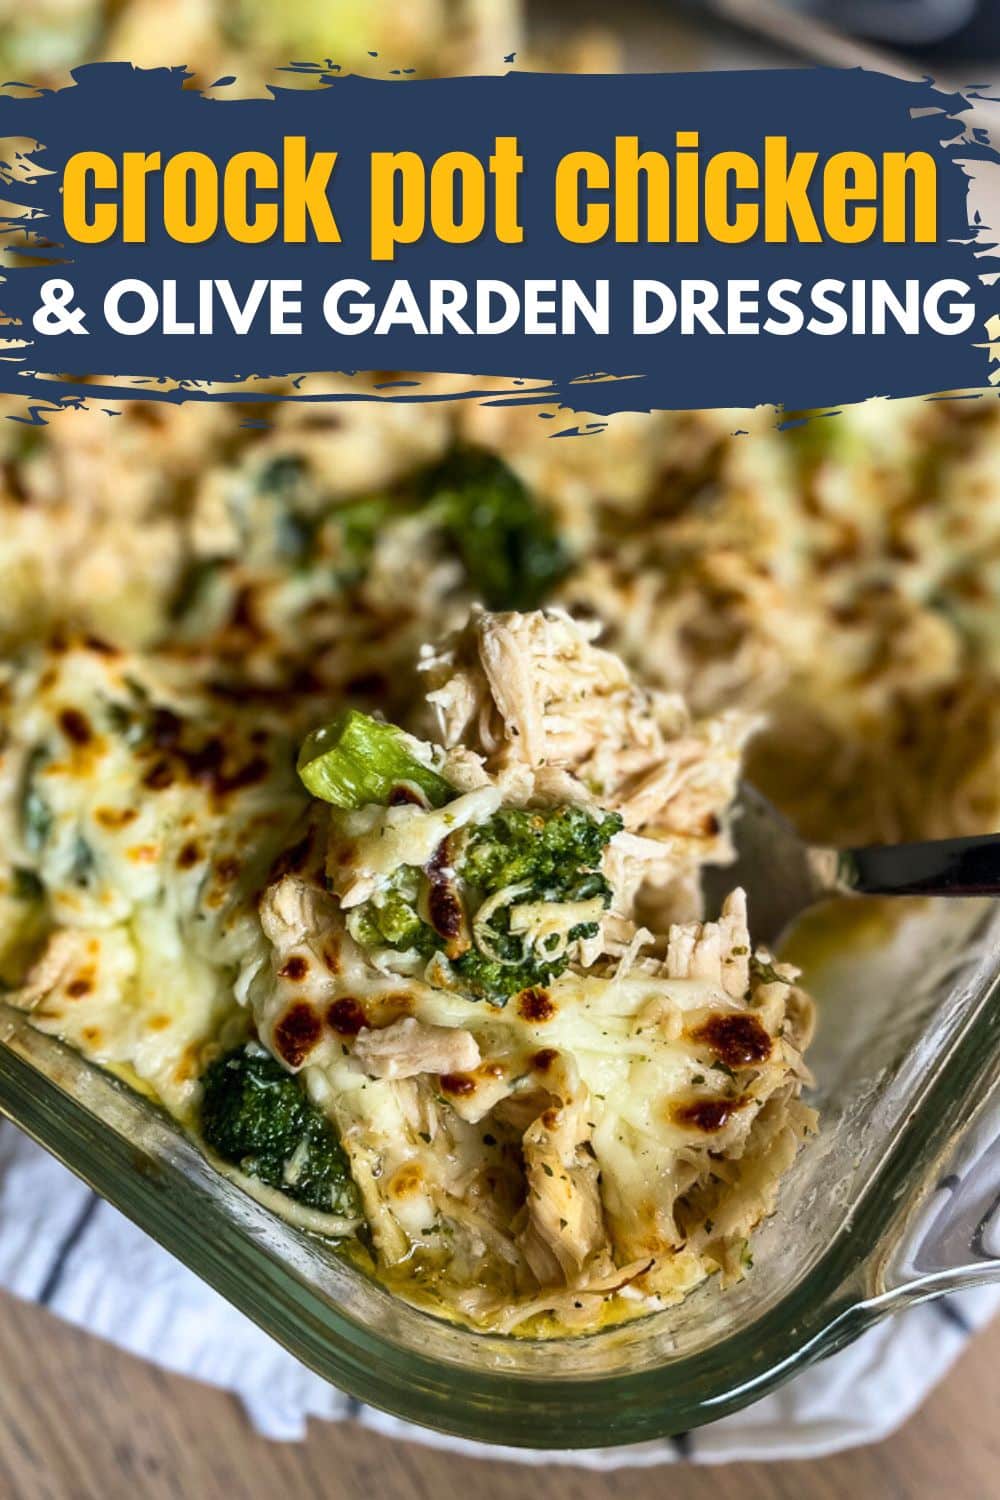 Creamy crock pot chicken with Olive Garden dressing and broccoli casserole, melted cheese topping, viral recipe in glass baking dish